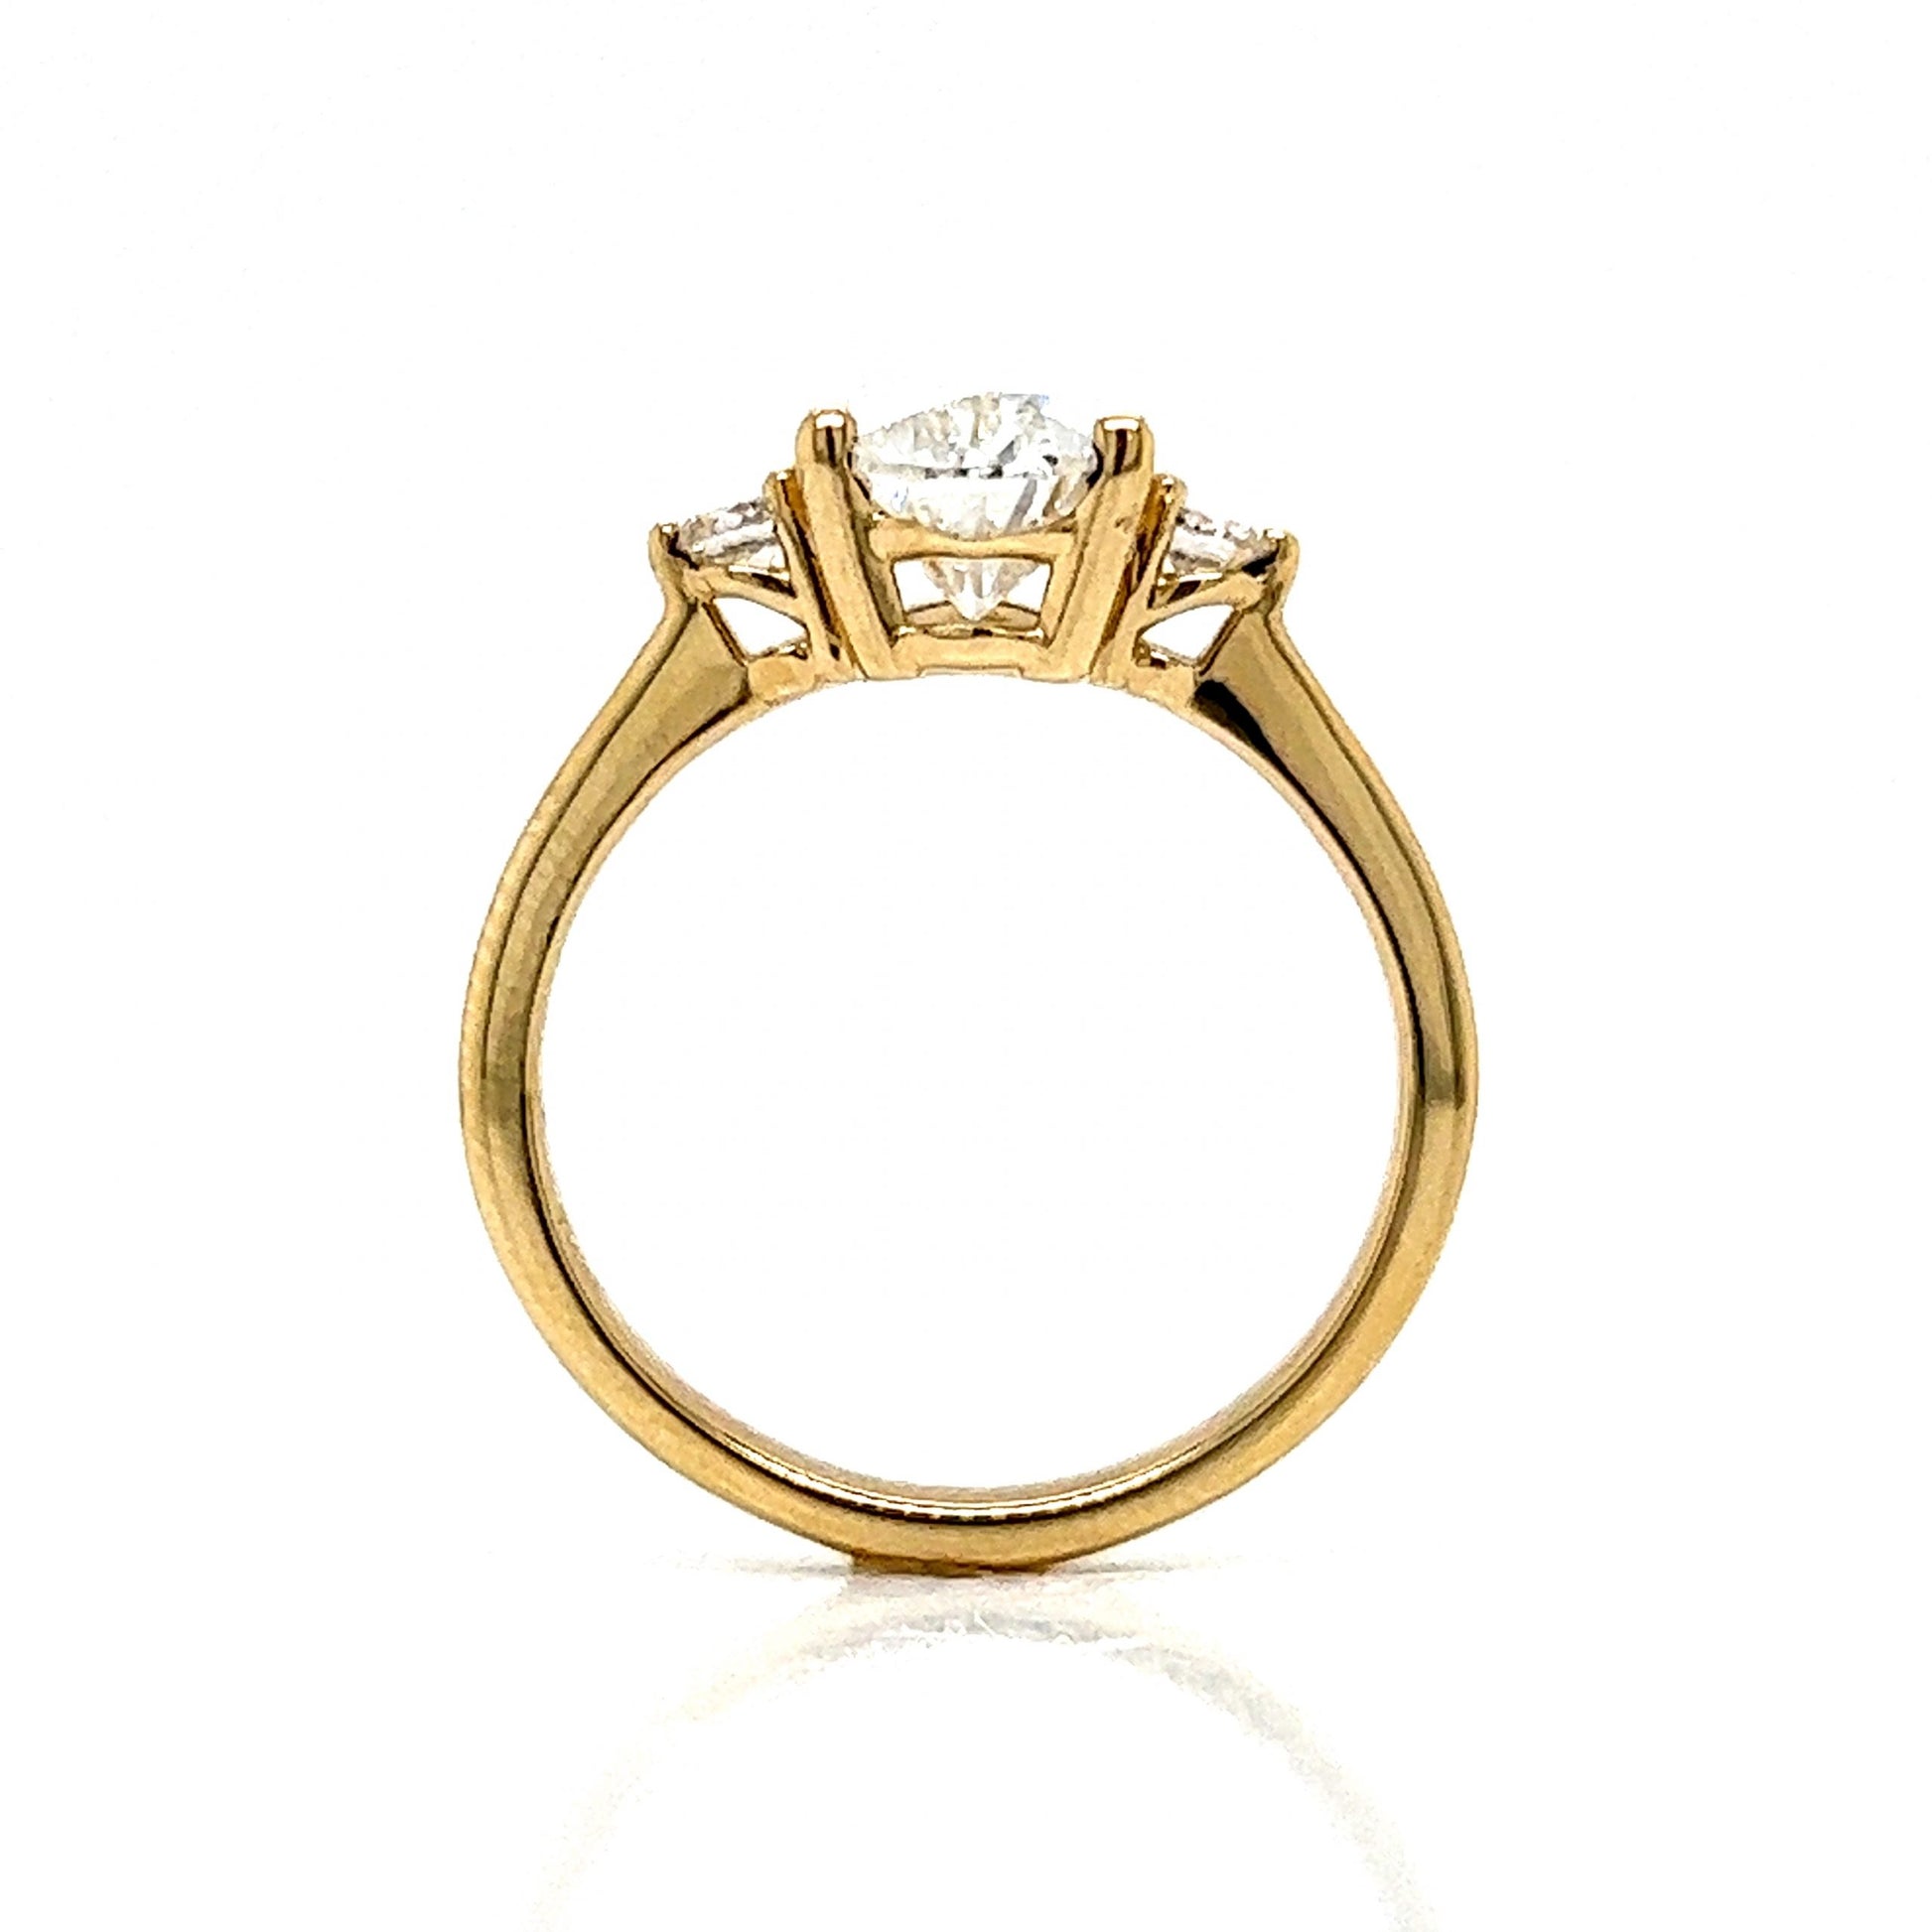 2.00 Pear Cut Diamond Engagement Ring in 14k Yellow Gold